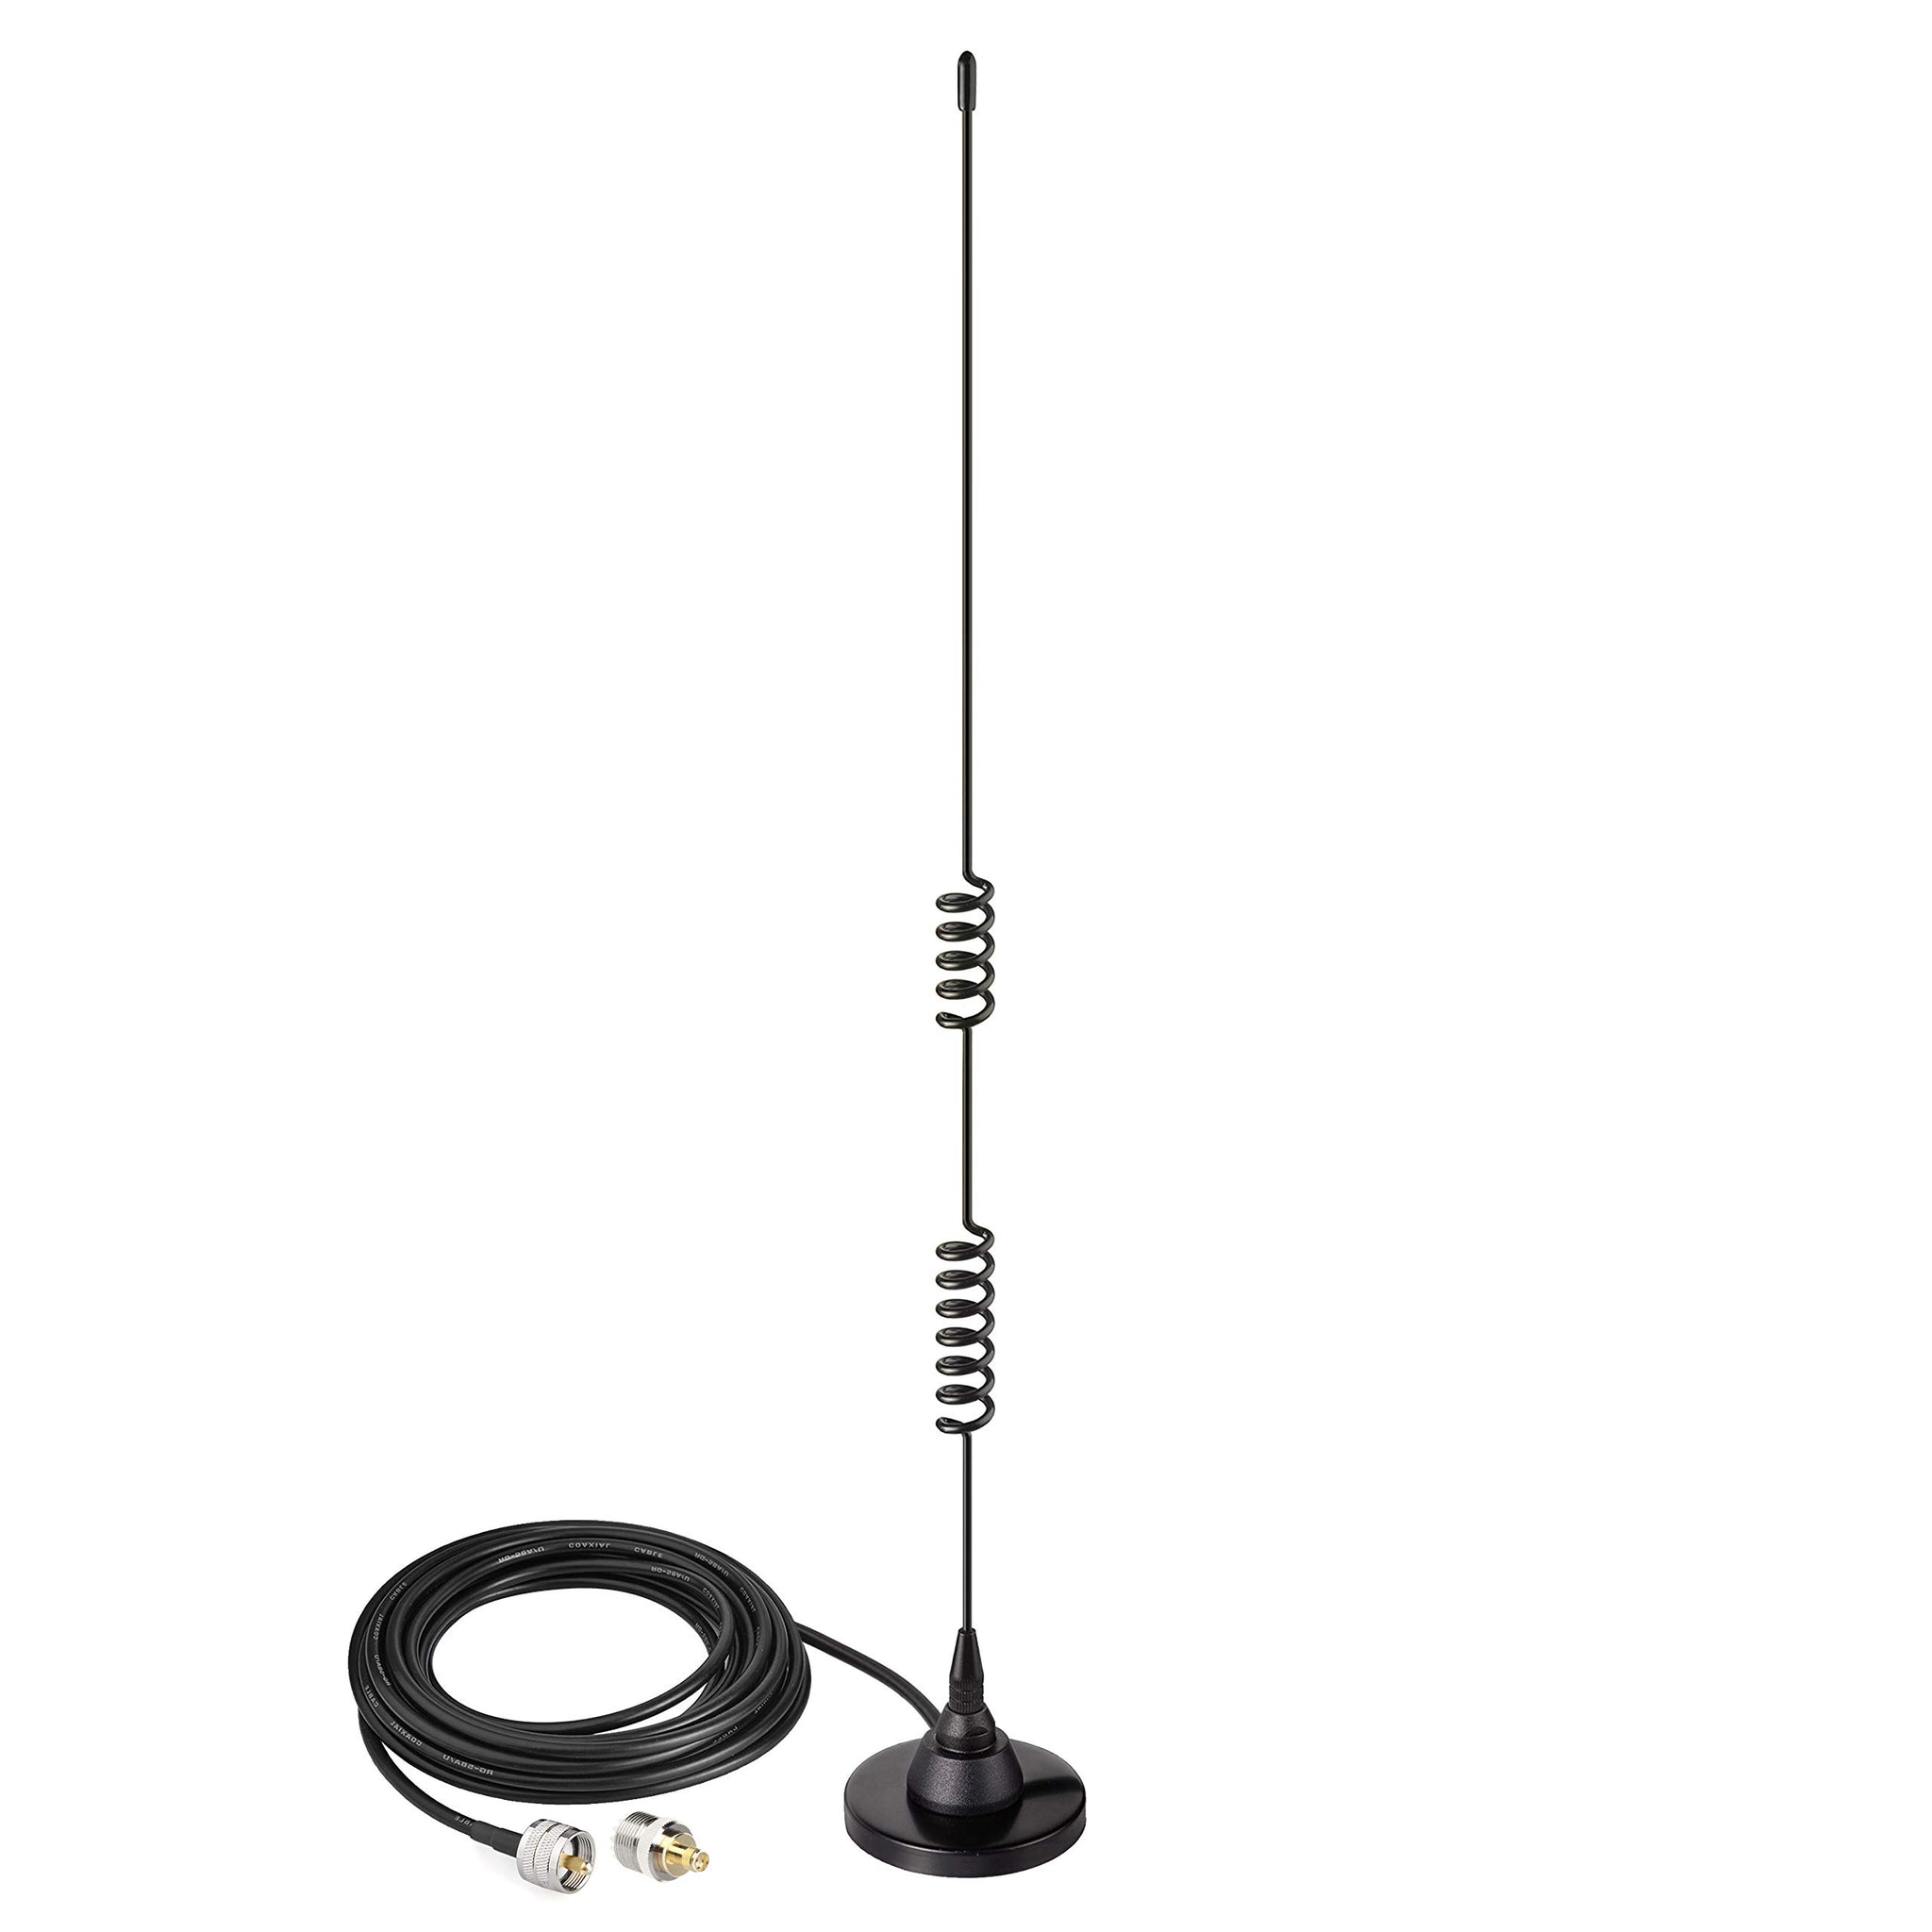 Mobile Radio Antenna Car VHF Antenna Dual Band UHF 136-174MHz 400-520MHz  UHF Antenna Car Magnetic Antenna Pl259 Male with 10ft RG58 Cable for Ham